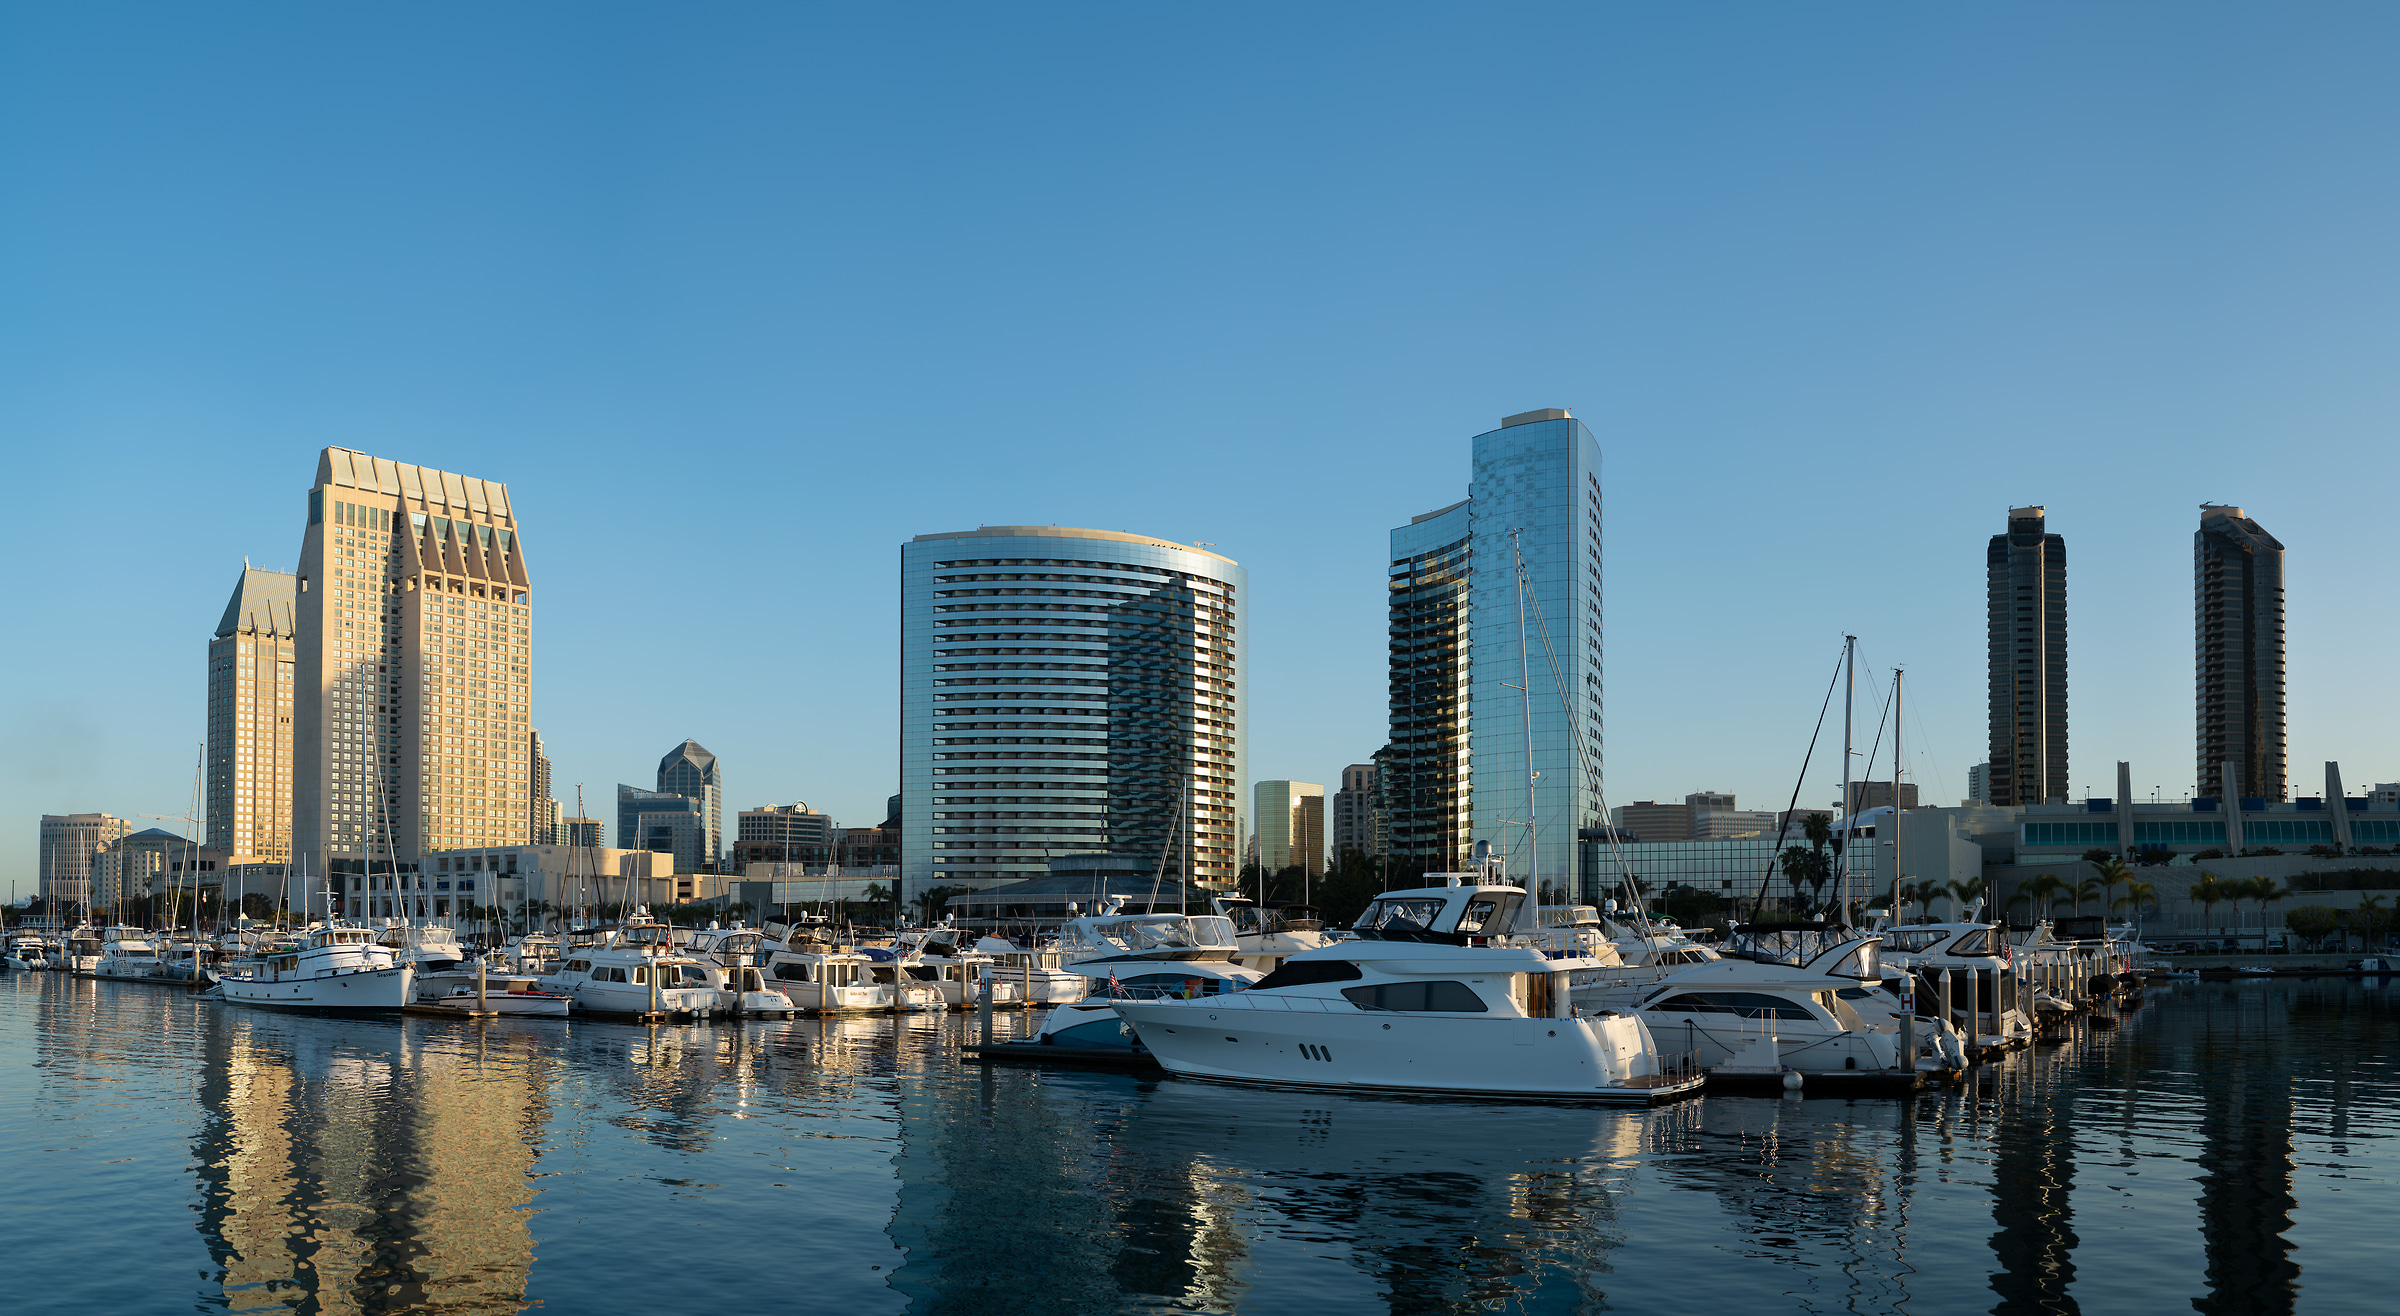 498 megapixels! A very high resolution, large-format VAST photo print of Embarcadero Marina in the morning with boats and the San Diego skyline; photograph created by Greg Probst in Embarcadero Marina, San Diego, California.